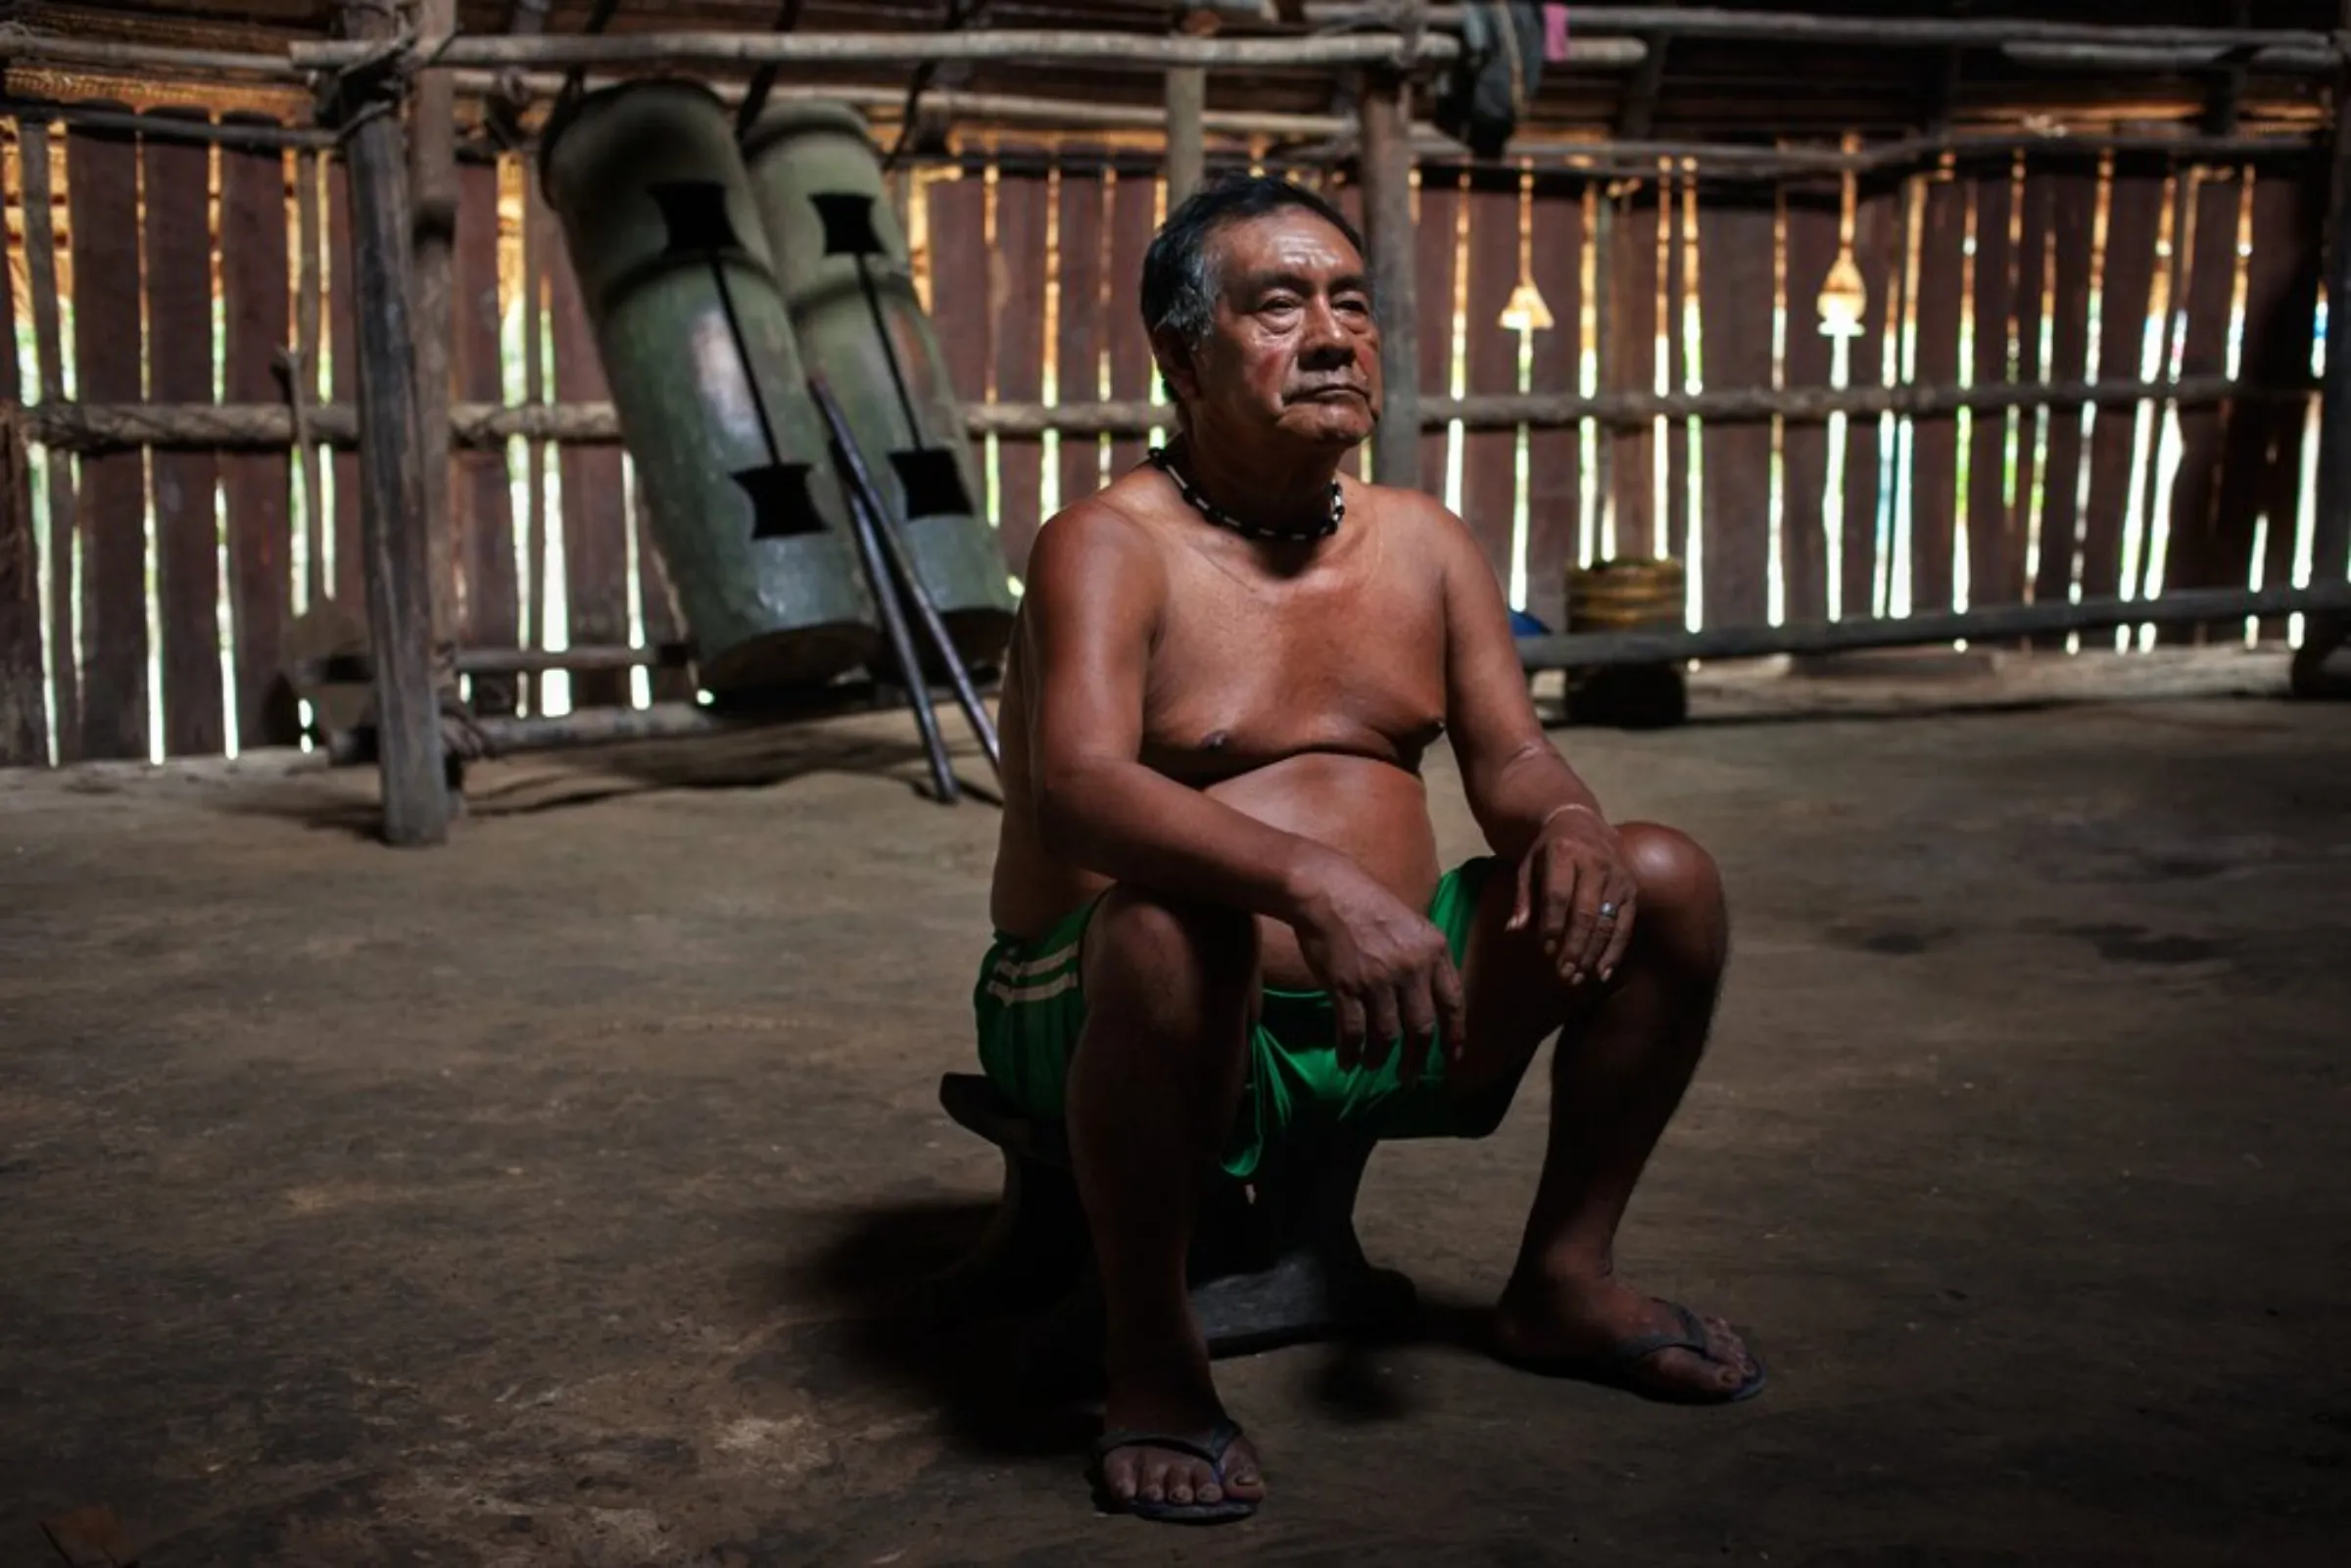 Shaman Faustino Matapi, 74, of the Matapi ethnic group sits in a maloka traditional dwelling in Colombia’s southeast Amazonas province. He is the spiritual leader of the Puerto Libre community and in charge of preserving cultural practices and oral traditions, including the community’s relationship with nature, December 16, 2021